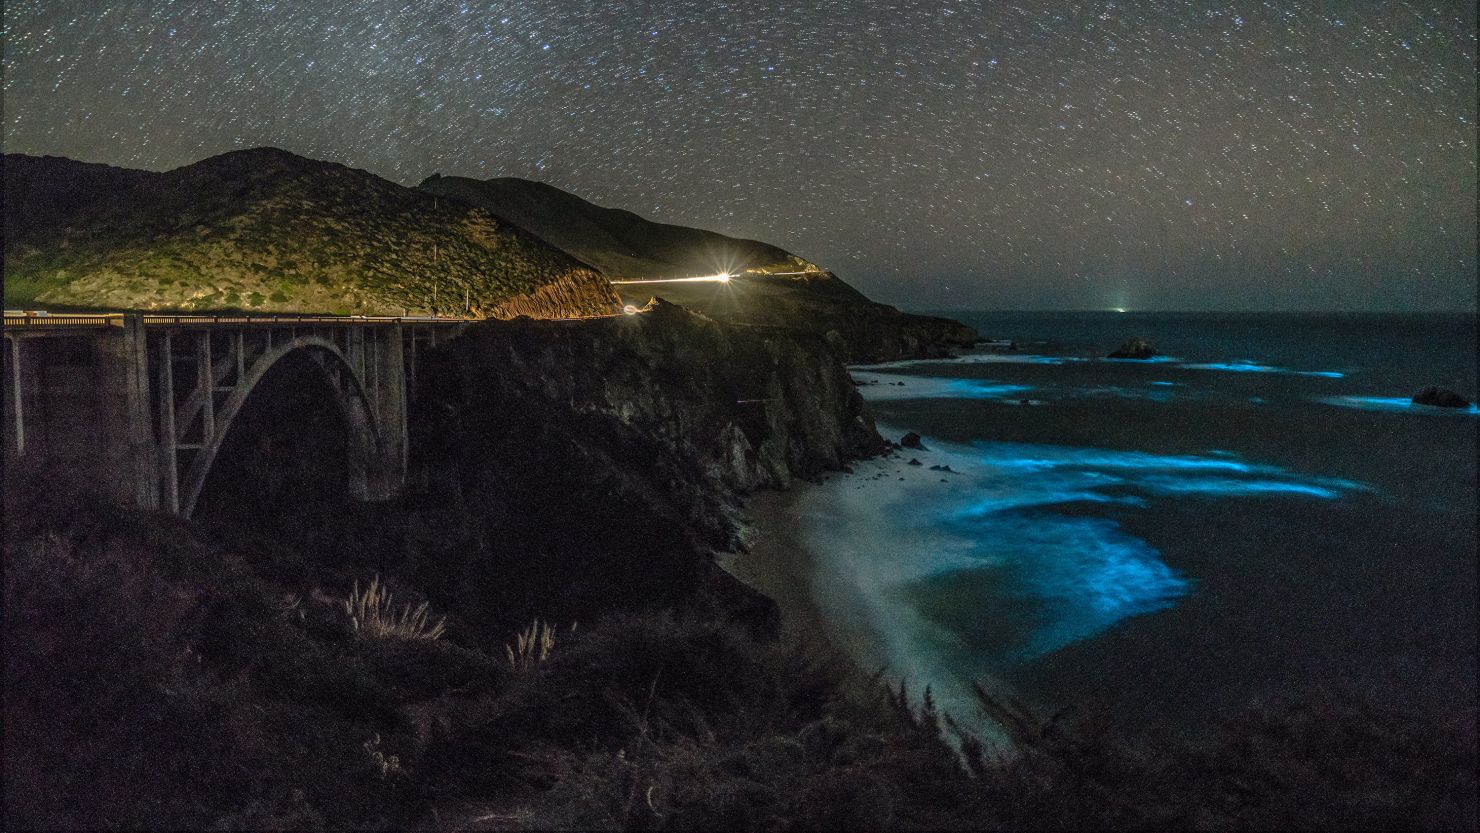 Phytoplankton concentrations in the waters below Bixby Creek Bridge illuminate the darkened waters. 